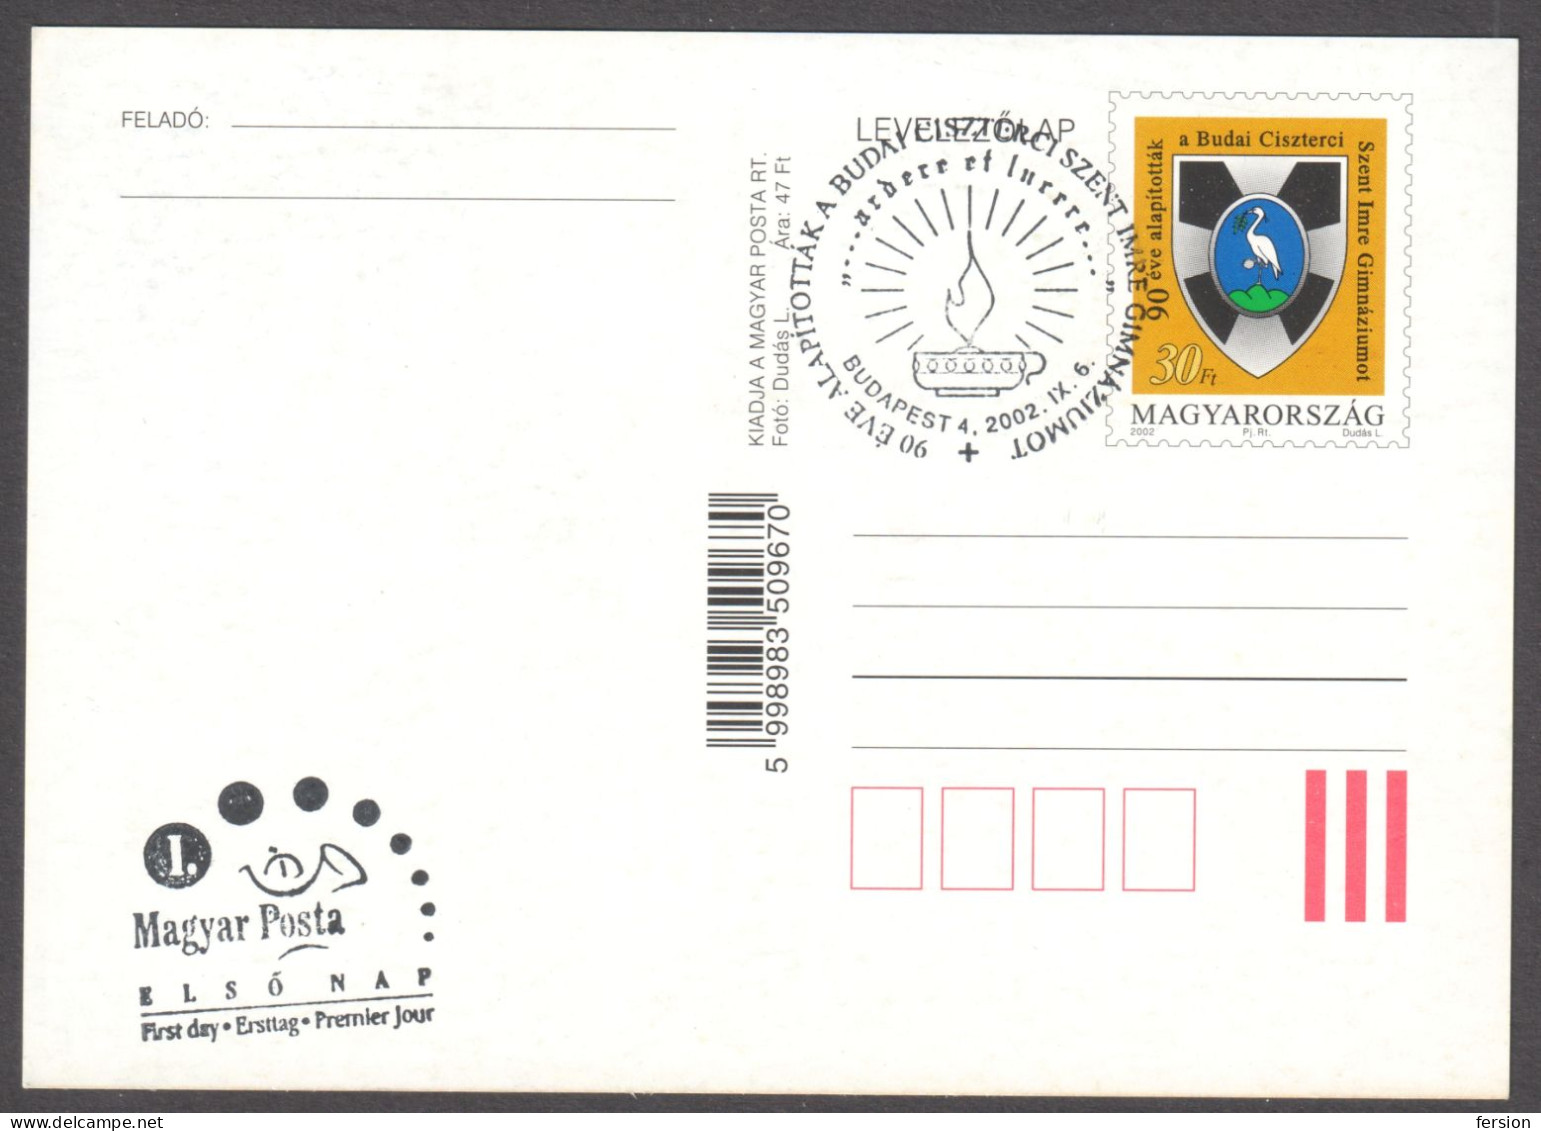 Cistercian Order Gymnasium School 2002 HUNGARY Coat Of Arms Stork Bird STATIONERY POSTCARD Not Used FDC Christianity - Christianisme